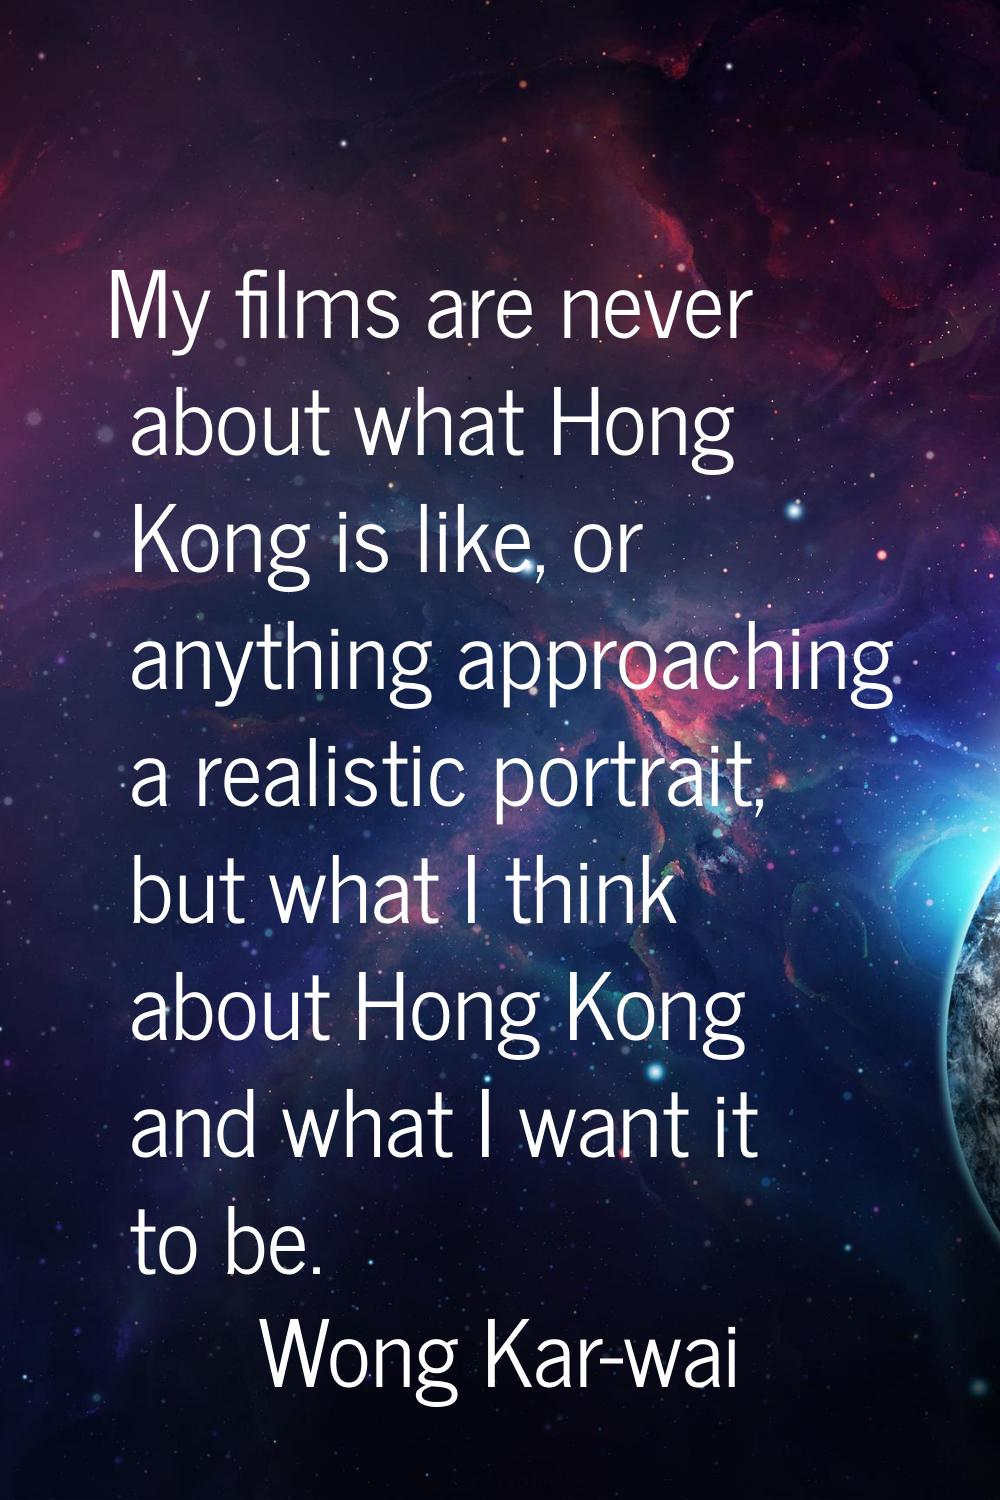 My films are never about what Hong Kong is like, or anything approaching a realistic portrait, but 